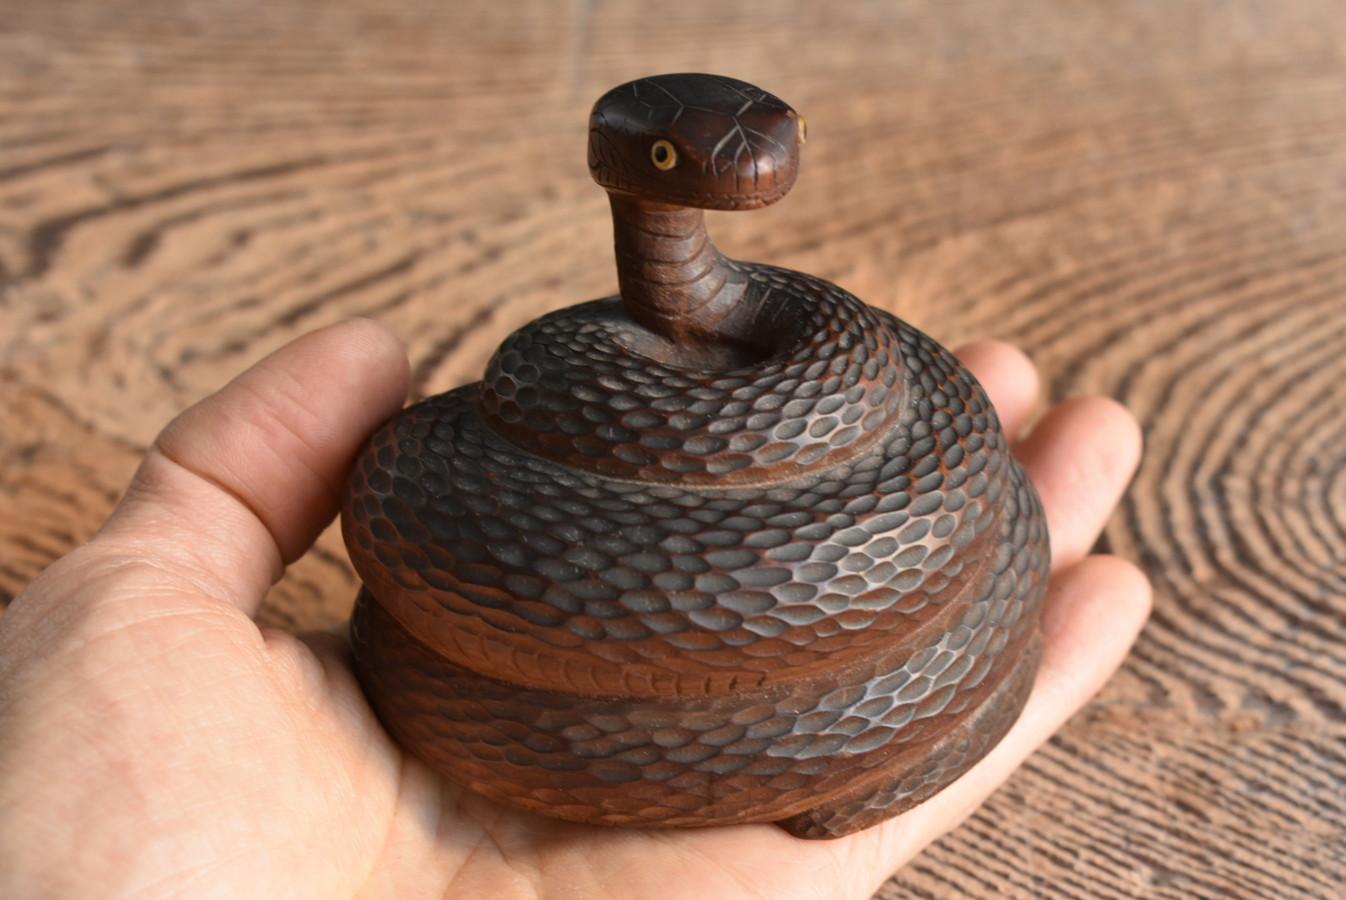 This is a wooden snake figurine made in the Taisho-early Showa period (1900-1950) in Japan.

Although it is a small palm-sized figurine, the expression of the snake and the expression of the scales etc.
It is reproduced finely.
The wood may be